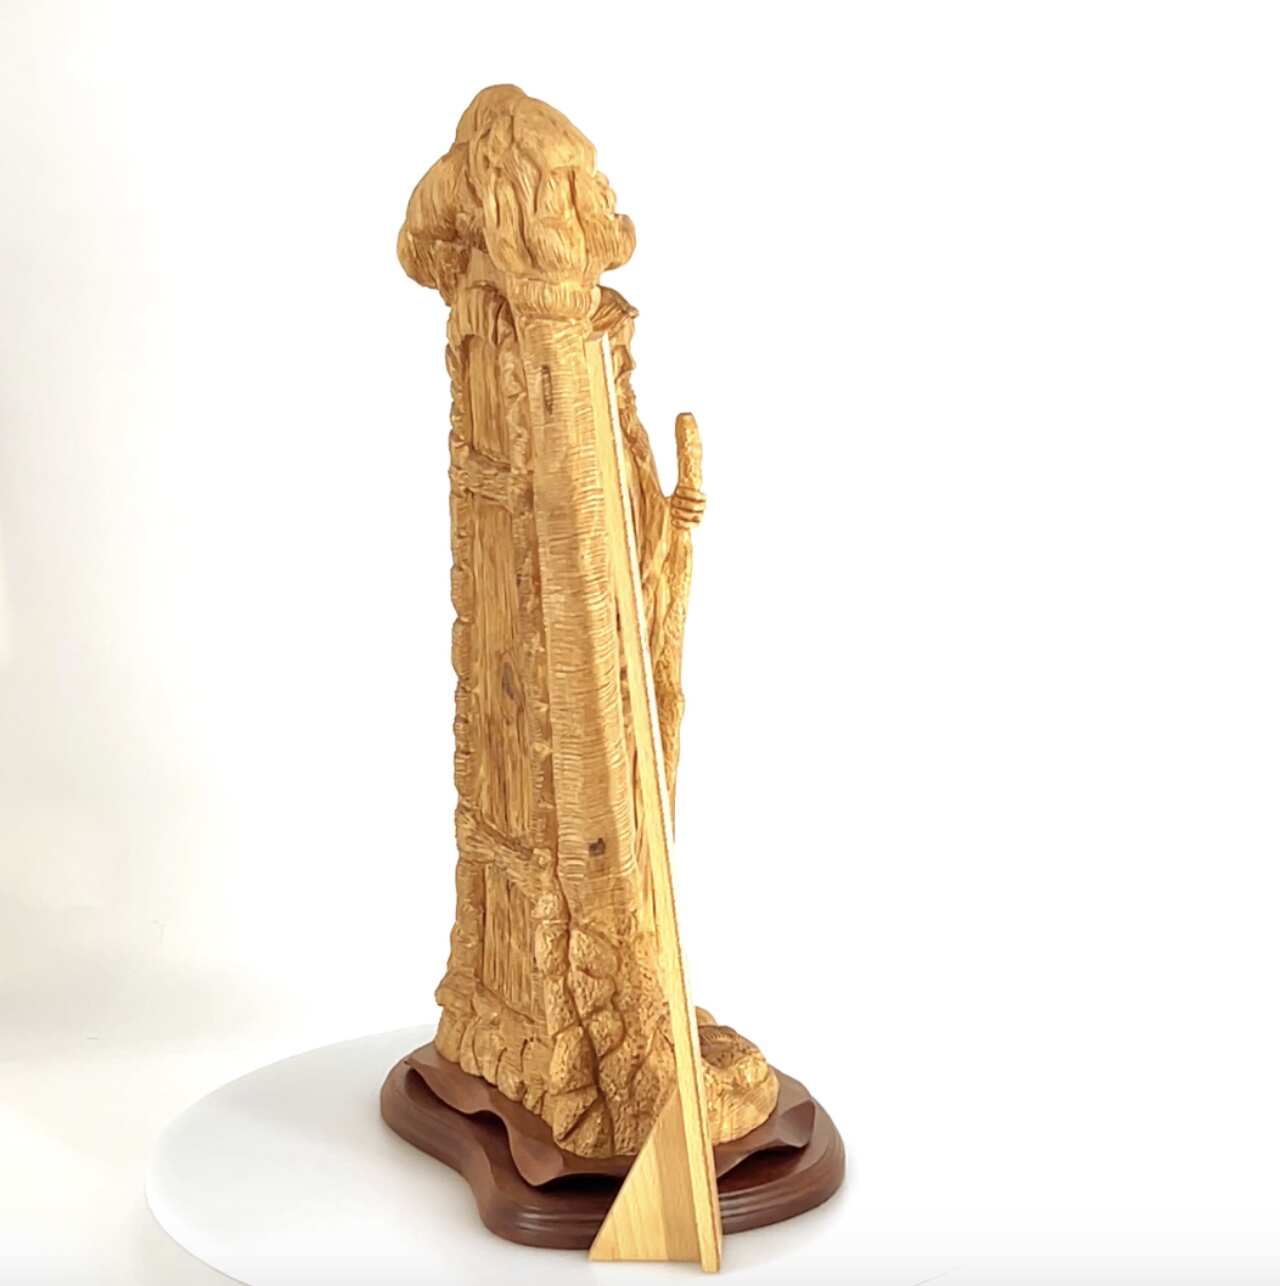 Jesus Christ "Knocking at the Door" Sculpture, 22.3" Olive Wood Carving from Holy Land